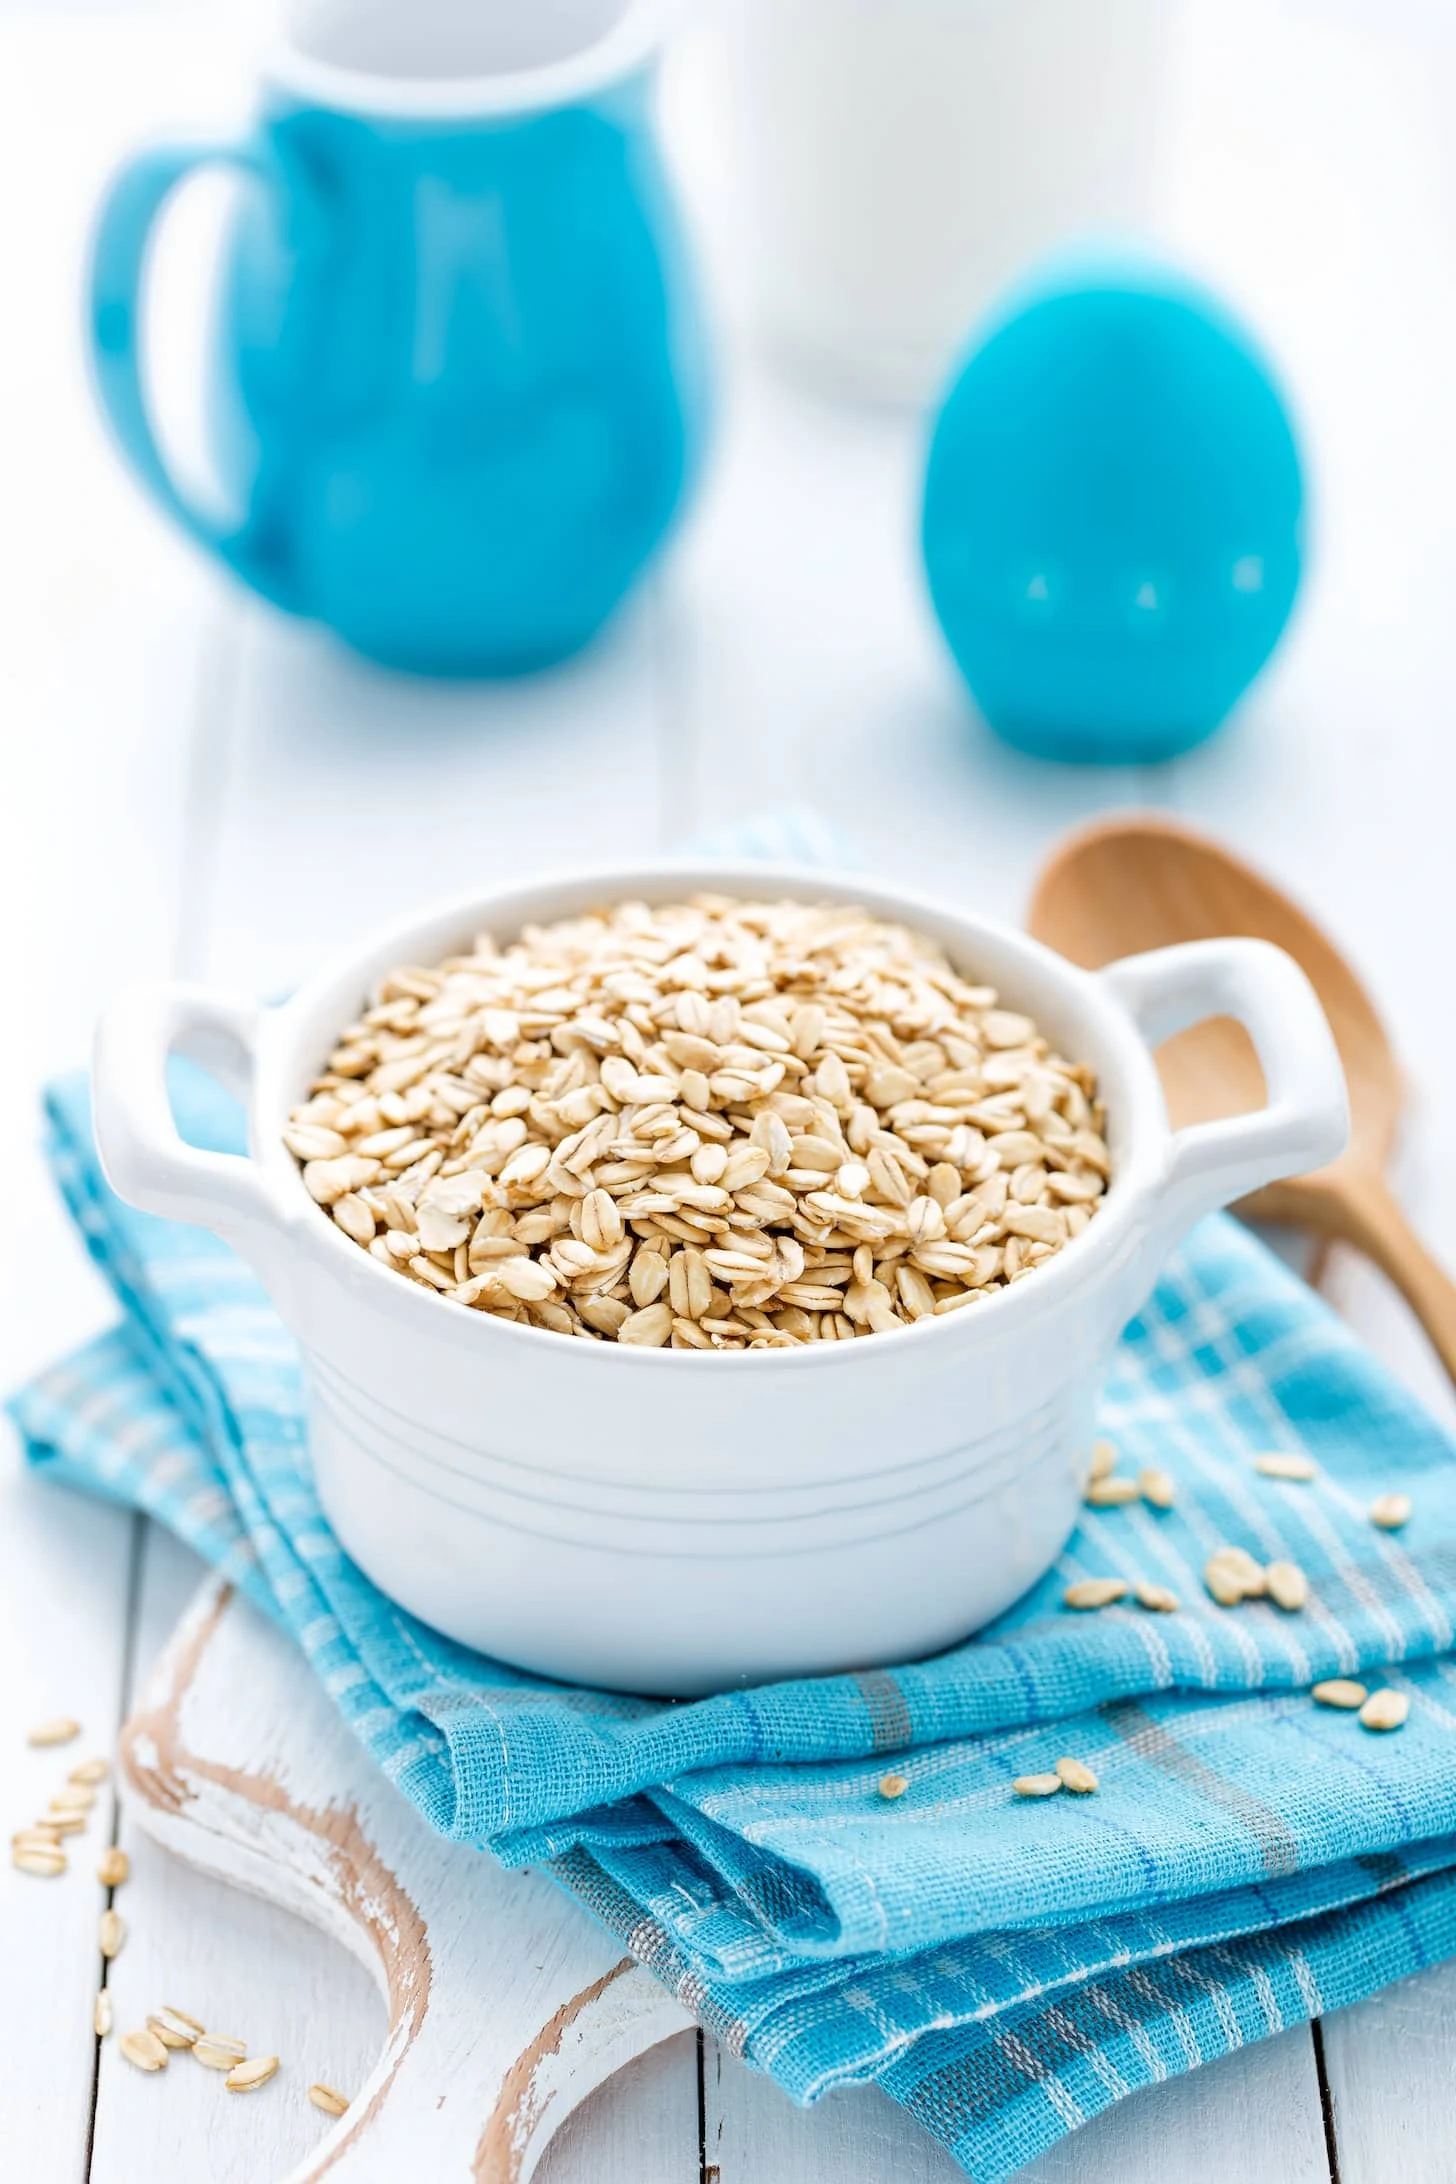 The Fitness Freak: Oatmeal: On the Go!  Hot drinks recipes, Cooking oatmeal,  Thermal cooking